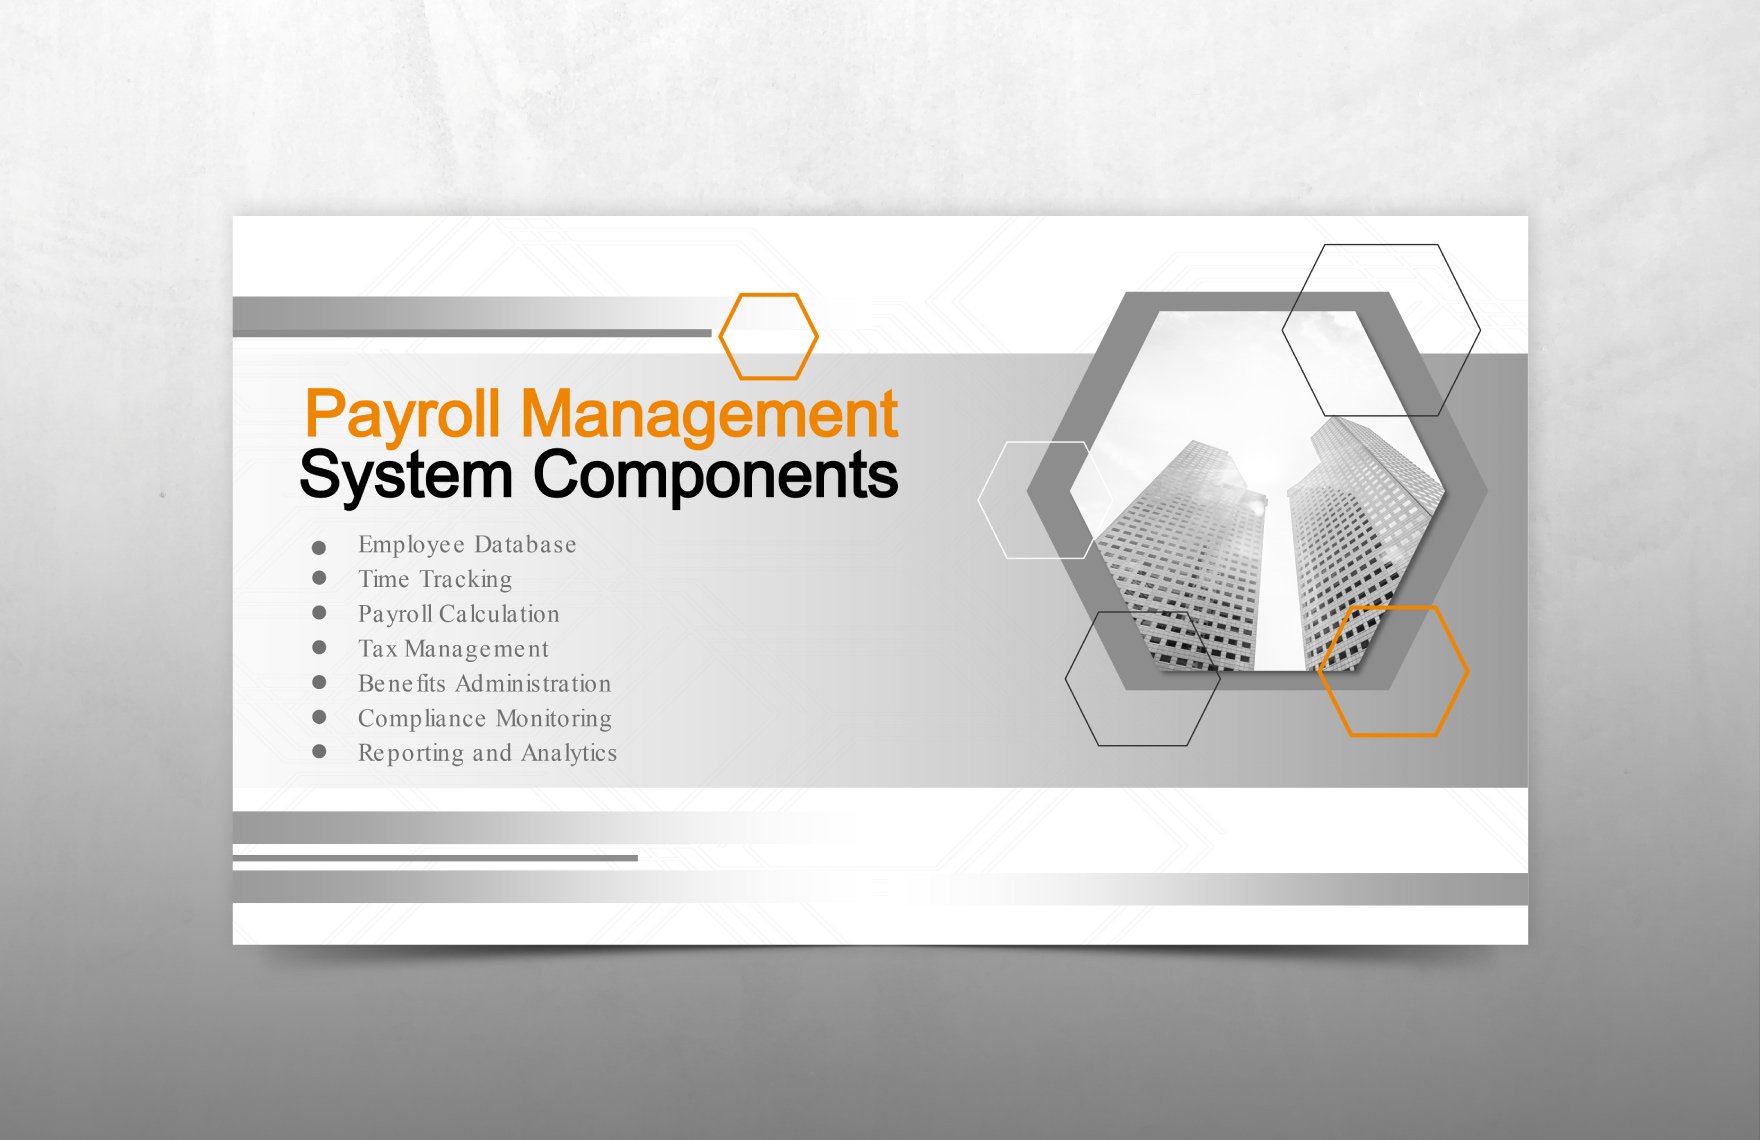 Payroll Management Systems Overview Presentation Template